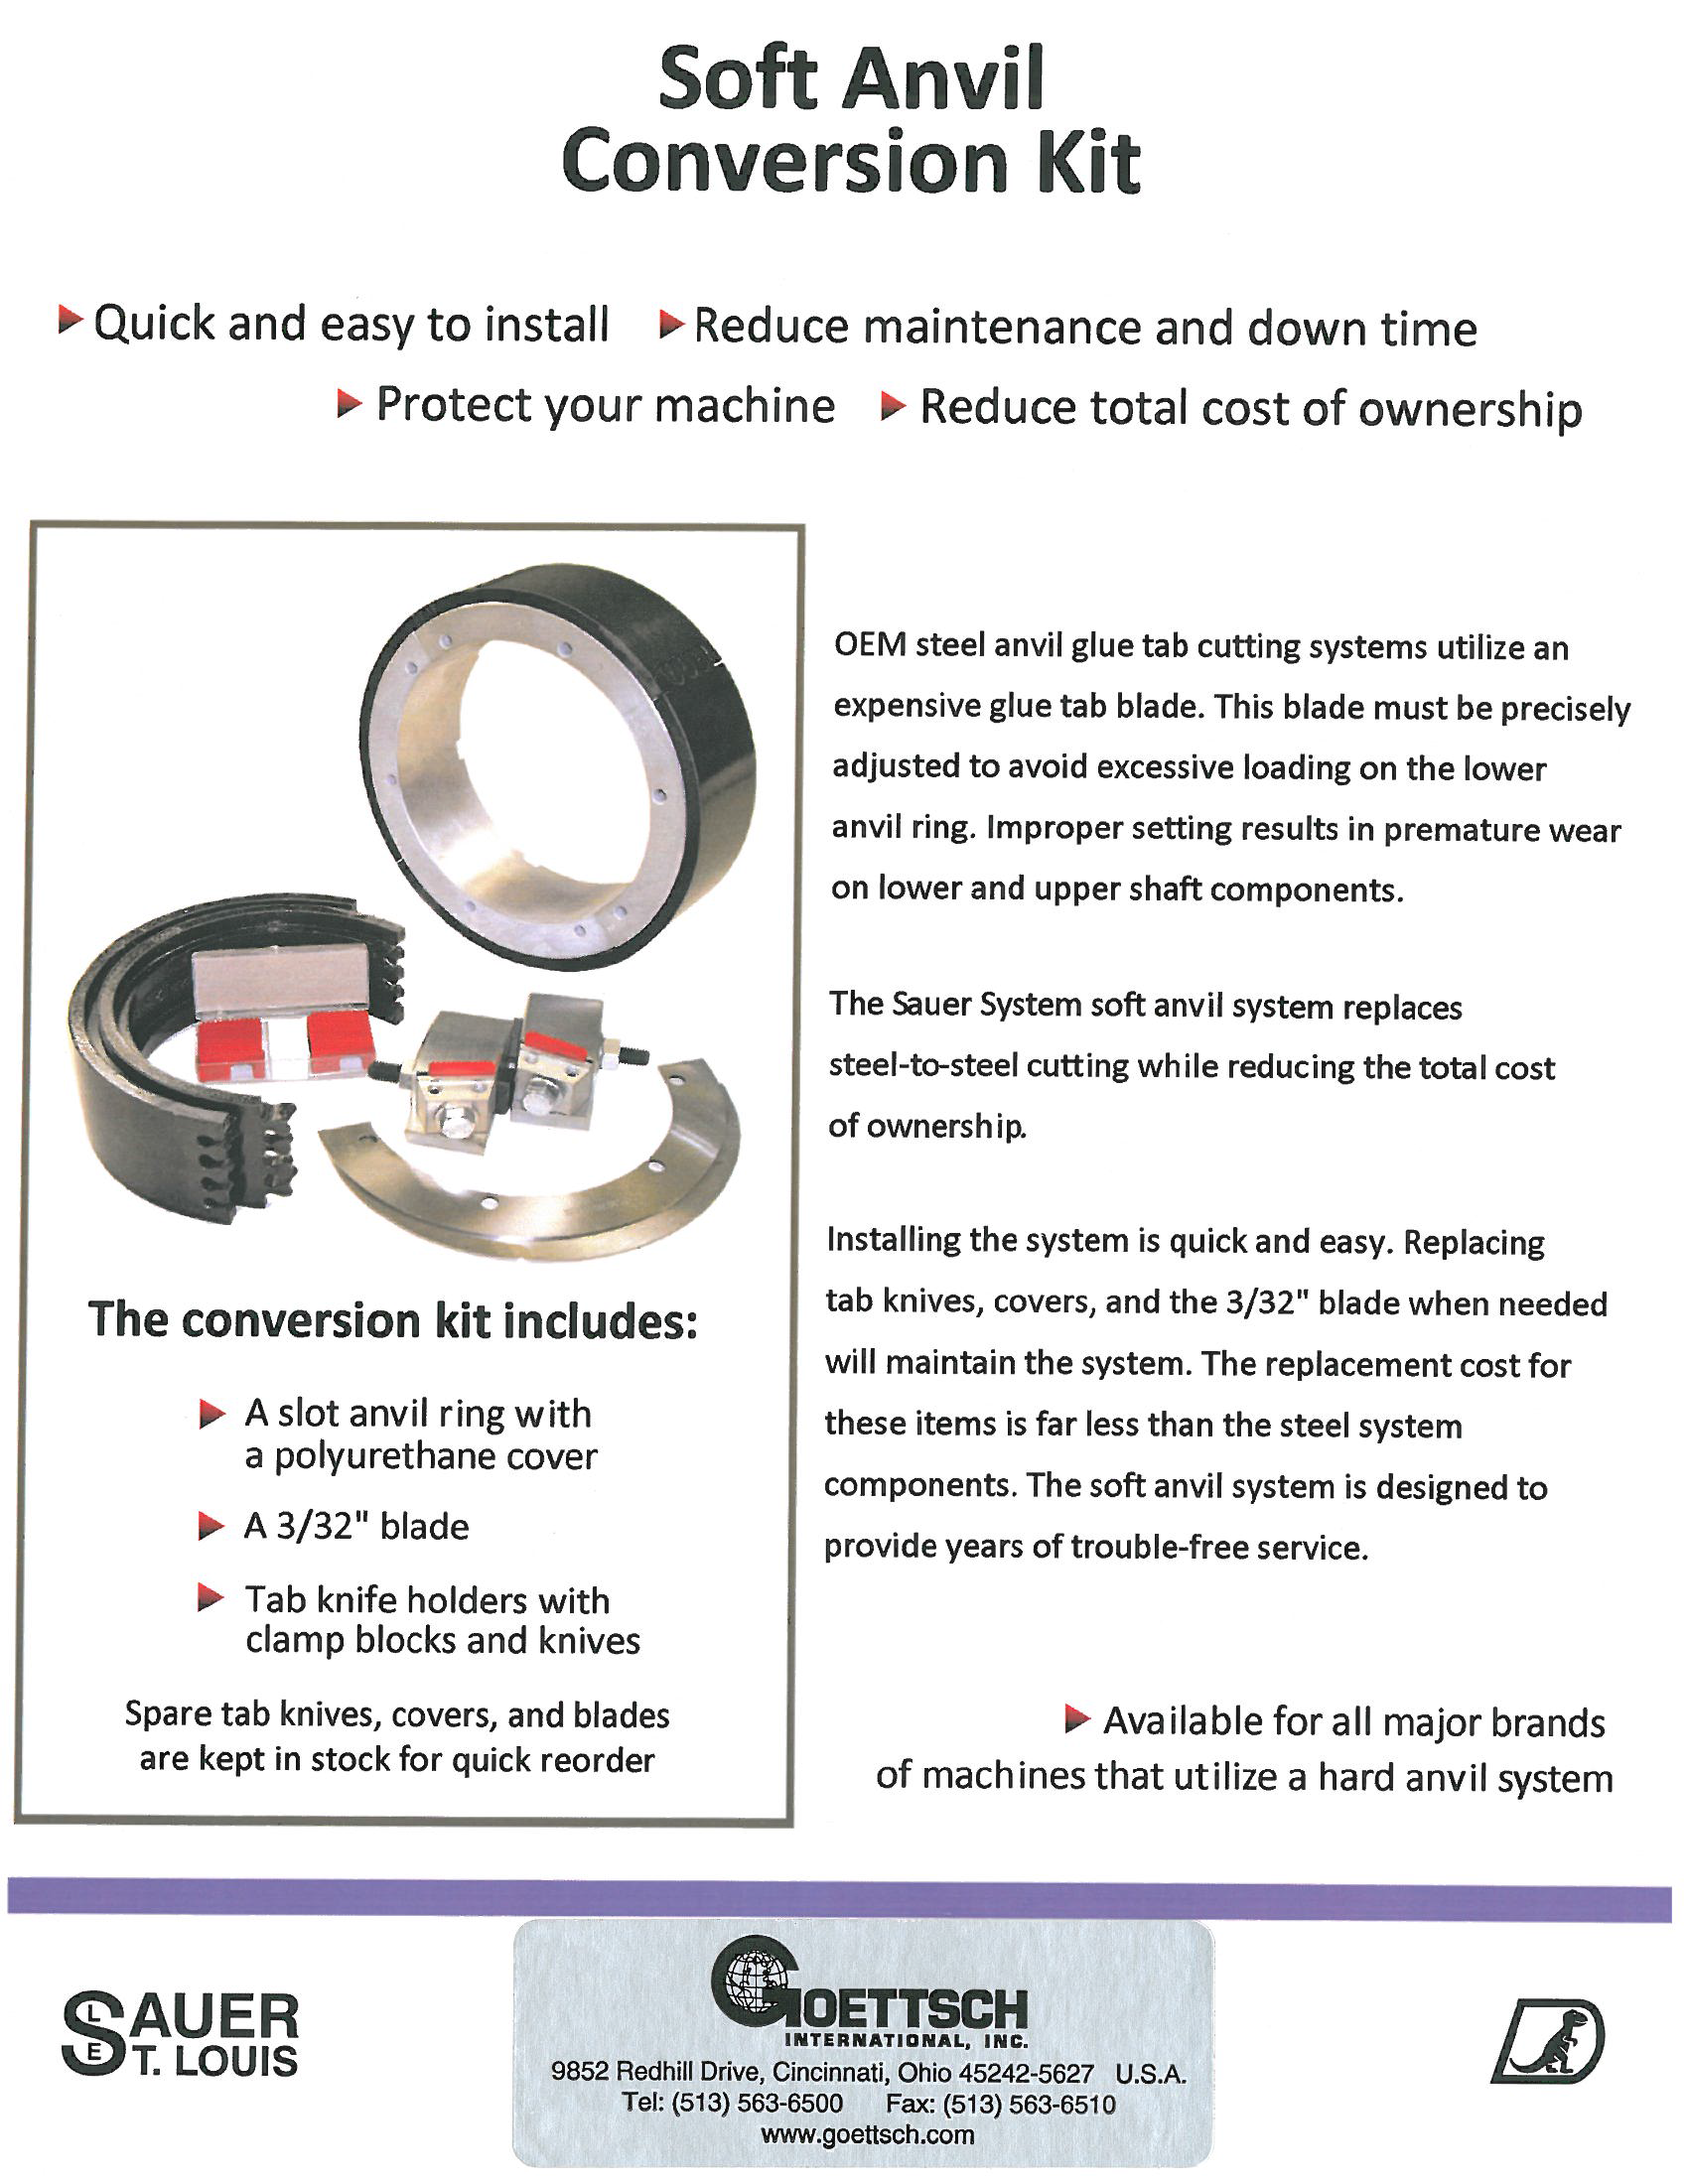 Learn more about the Soft Anvil Conversion Kit and Stitch Tab Knives in the Sauer System brochure.